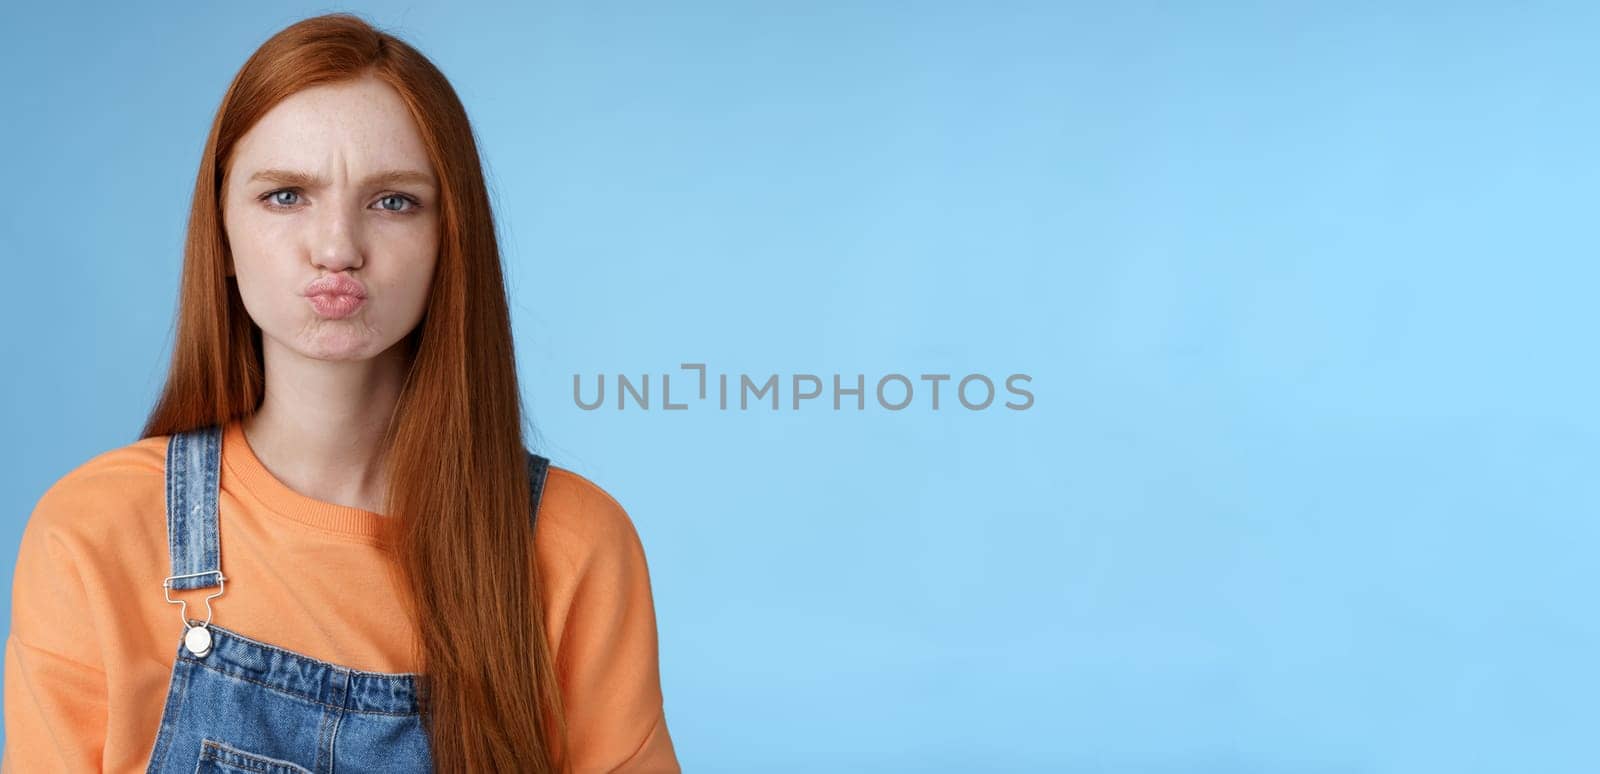 Moody displeased clingy girlfriend redhead blue eyes pouting sulking upset offended frowning making grimace showing attitude standing disappointed unsatisfied blue background, complaining by Benzoix